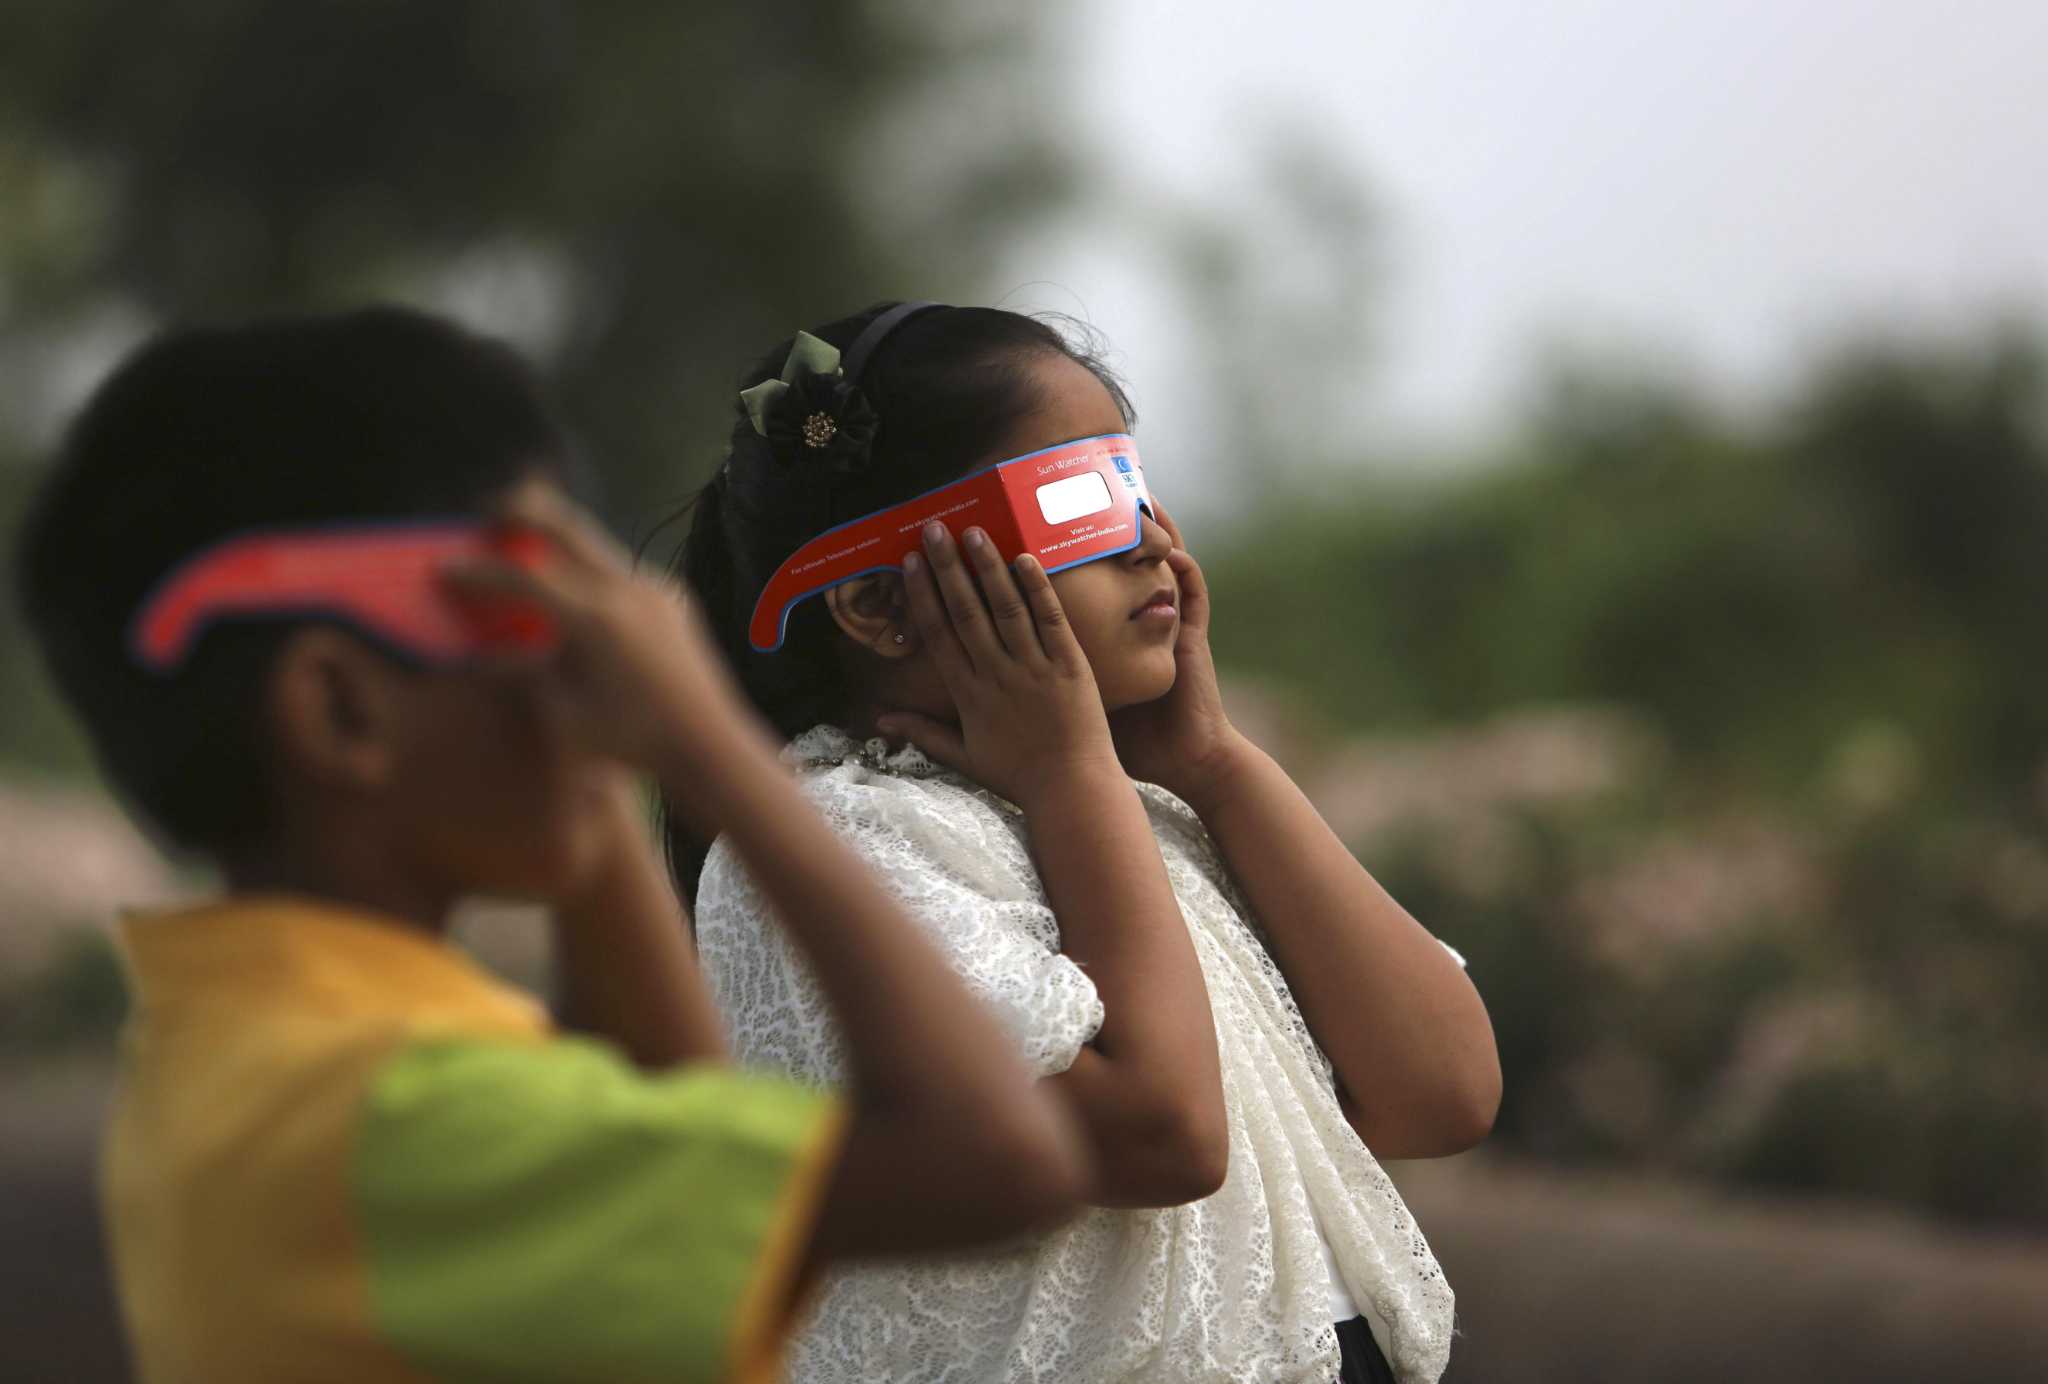 Immediate Caution Is Granted Regarding Unprotected Solar Eclipse Viewing: Peril of Permanent Eye Damage Emphasizes